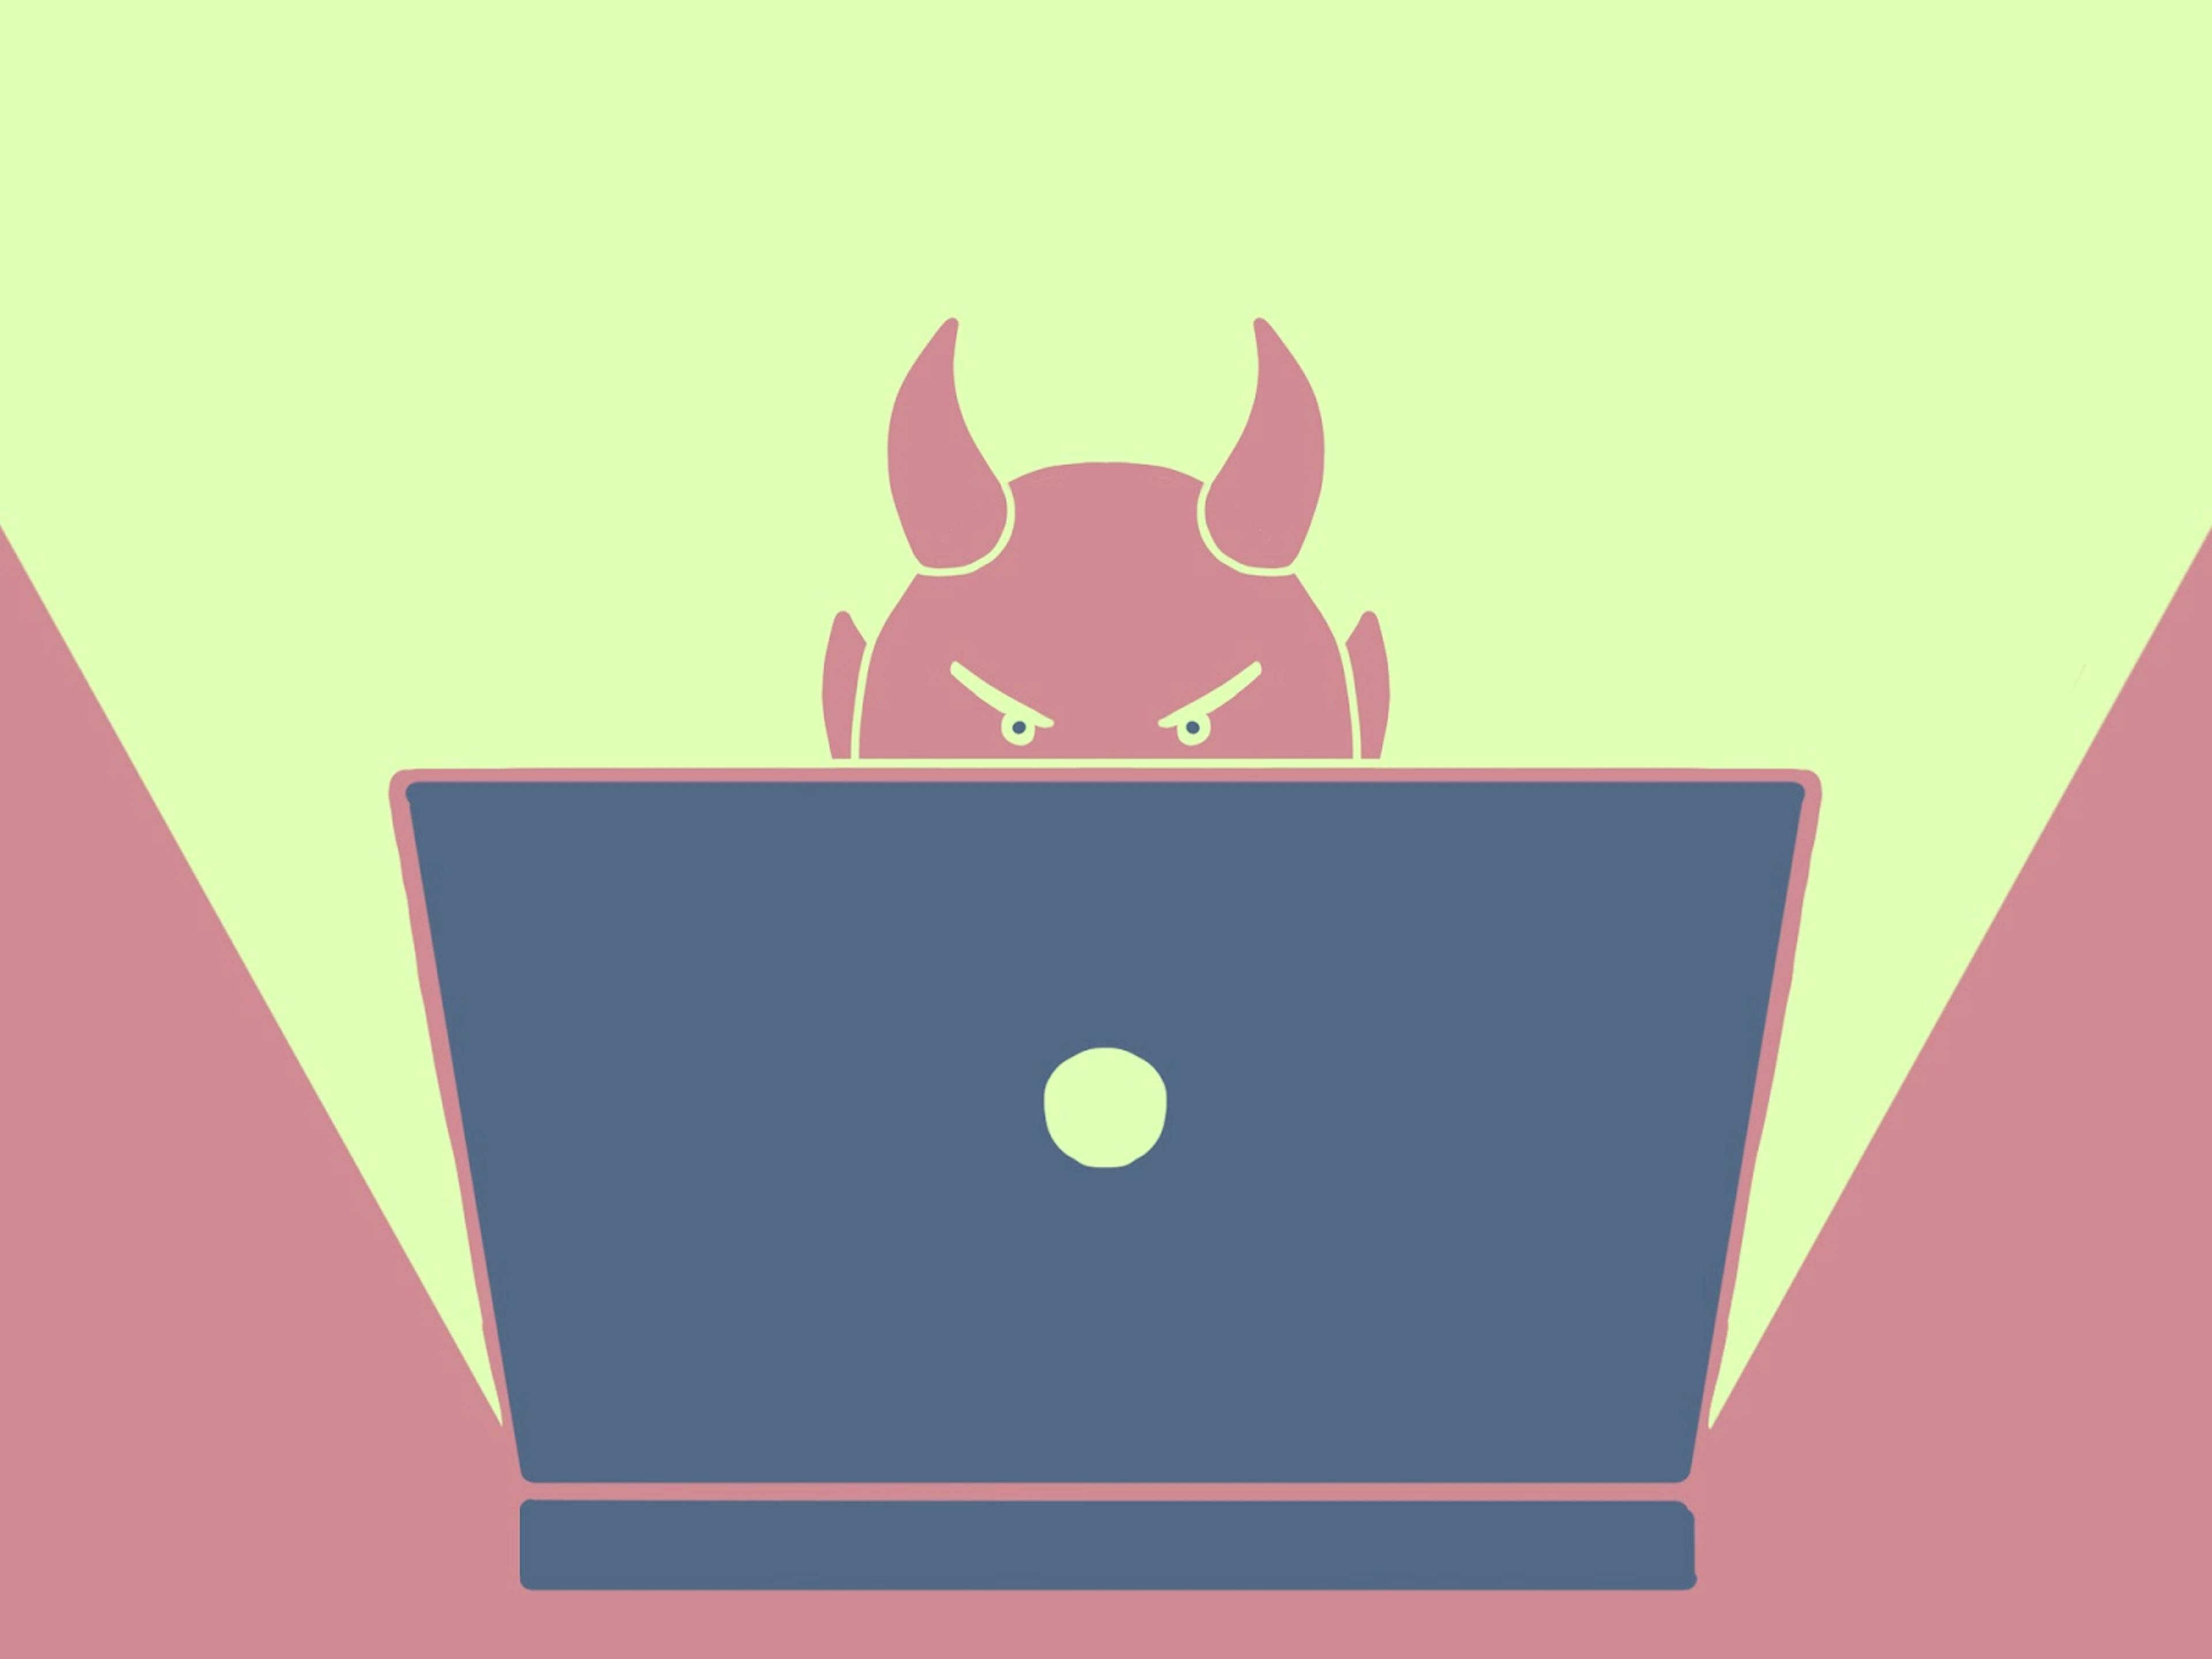 Evil forces now usually work online. Illustrated by kertburger.